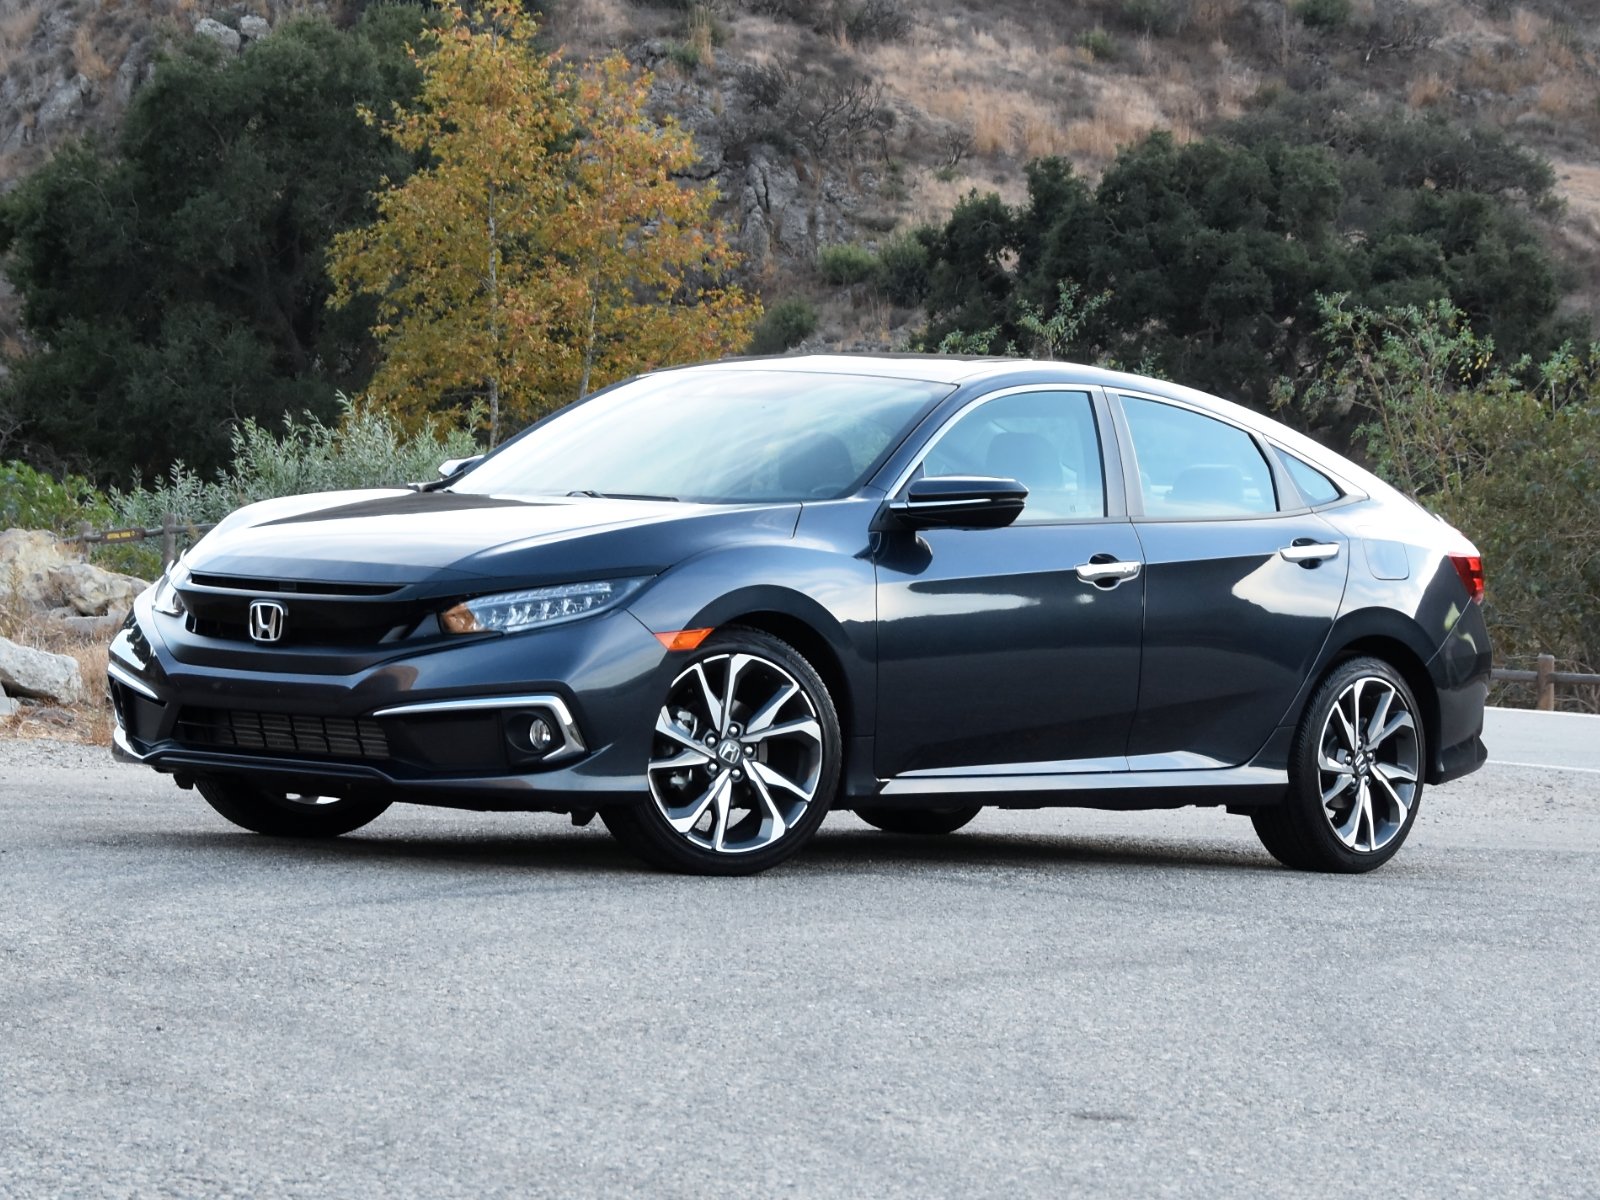 2021 Honda Civic Test Drive Review summaryImage